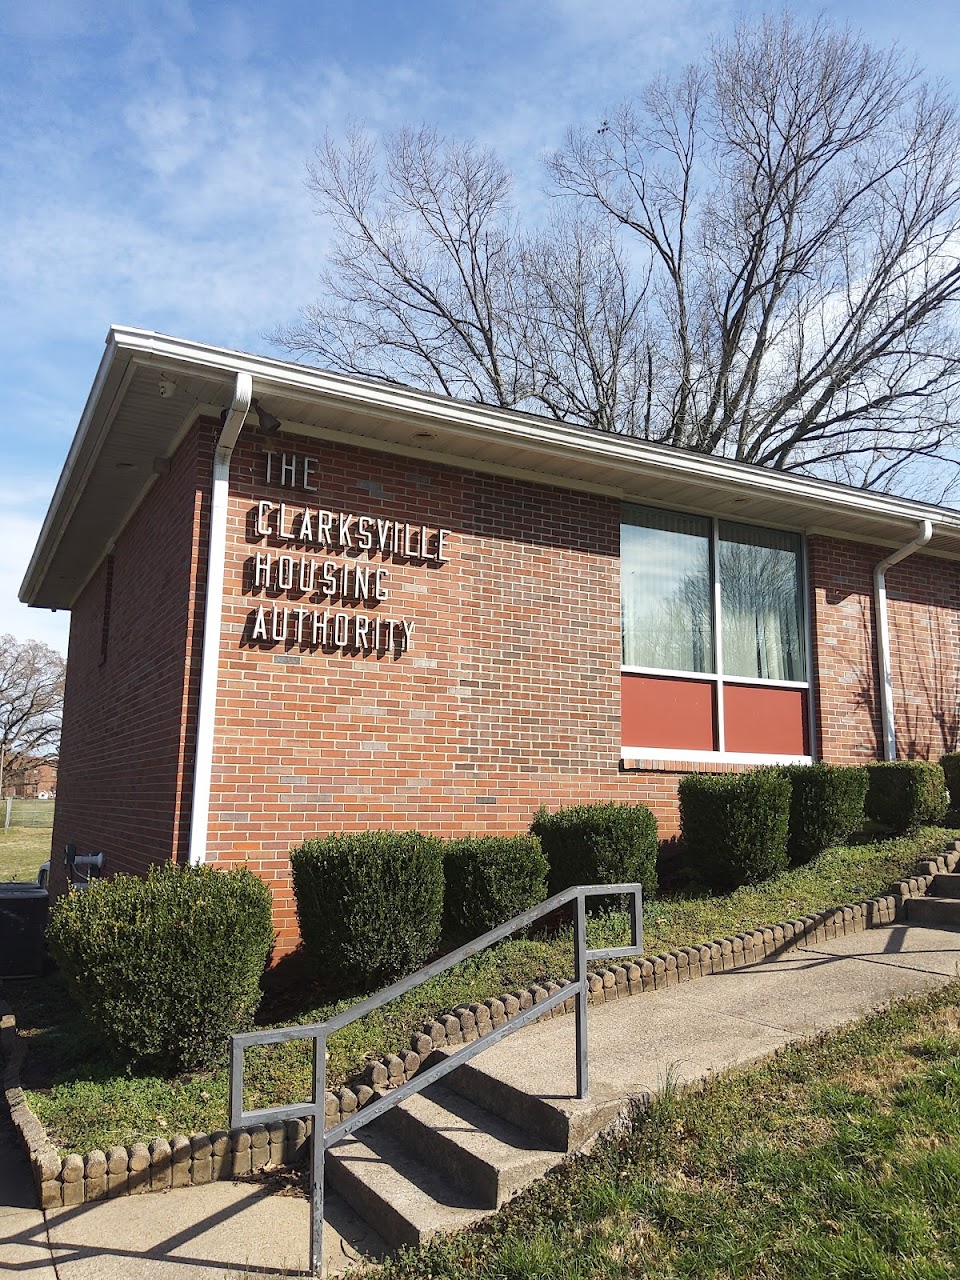 Photo of The Clarksville Housing Authority. Affordable housing located at 721 RICHARDSON Street CLARKSVILLE, TN 37040